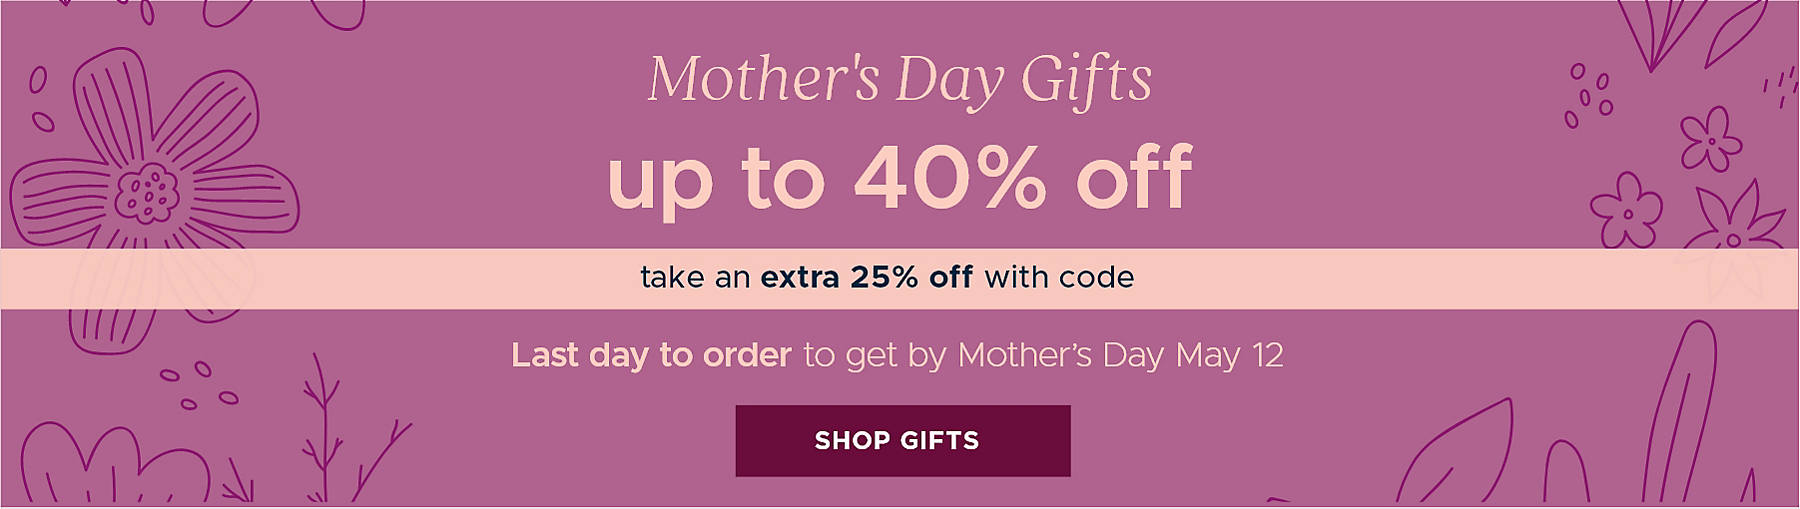 Mother's Day Gifts up to 40% off take an extra 25% off with code Last day to order to get by Mother's Day May 12 Shop Gifts